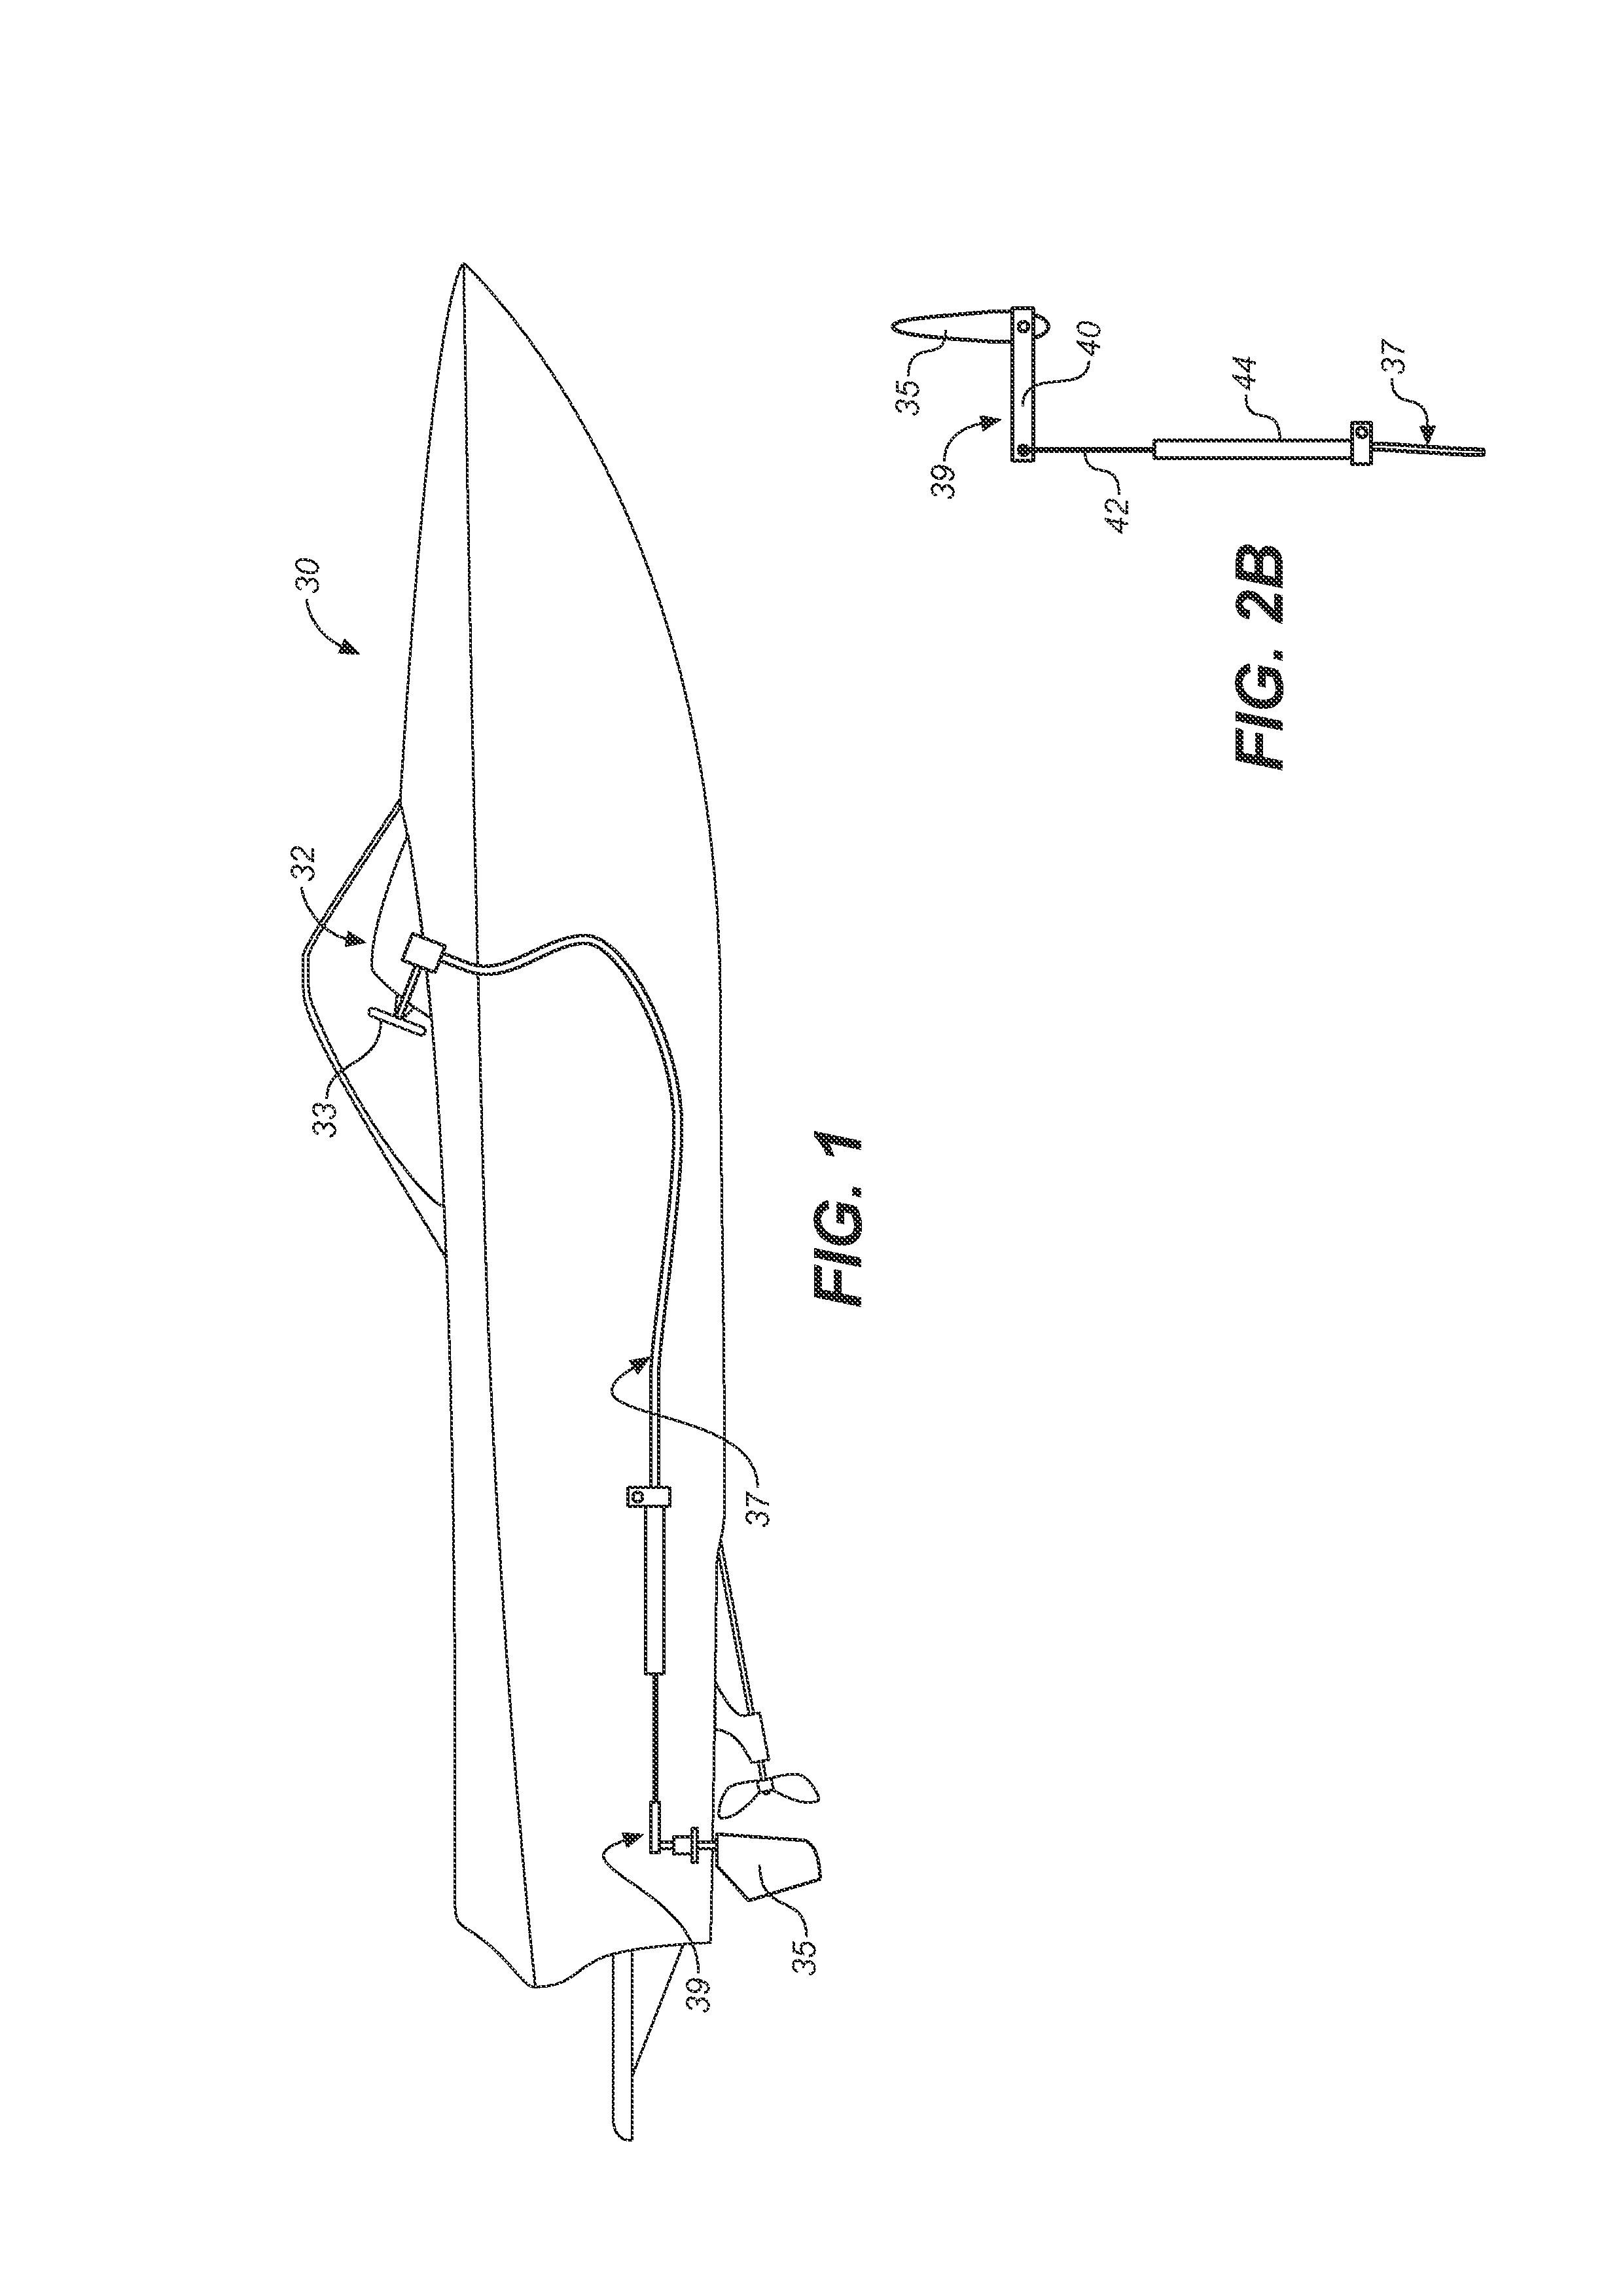 Method and apparatus for dampening rudder vibration